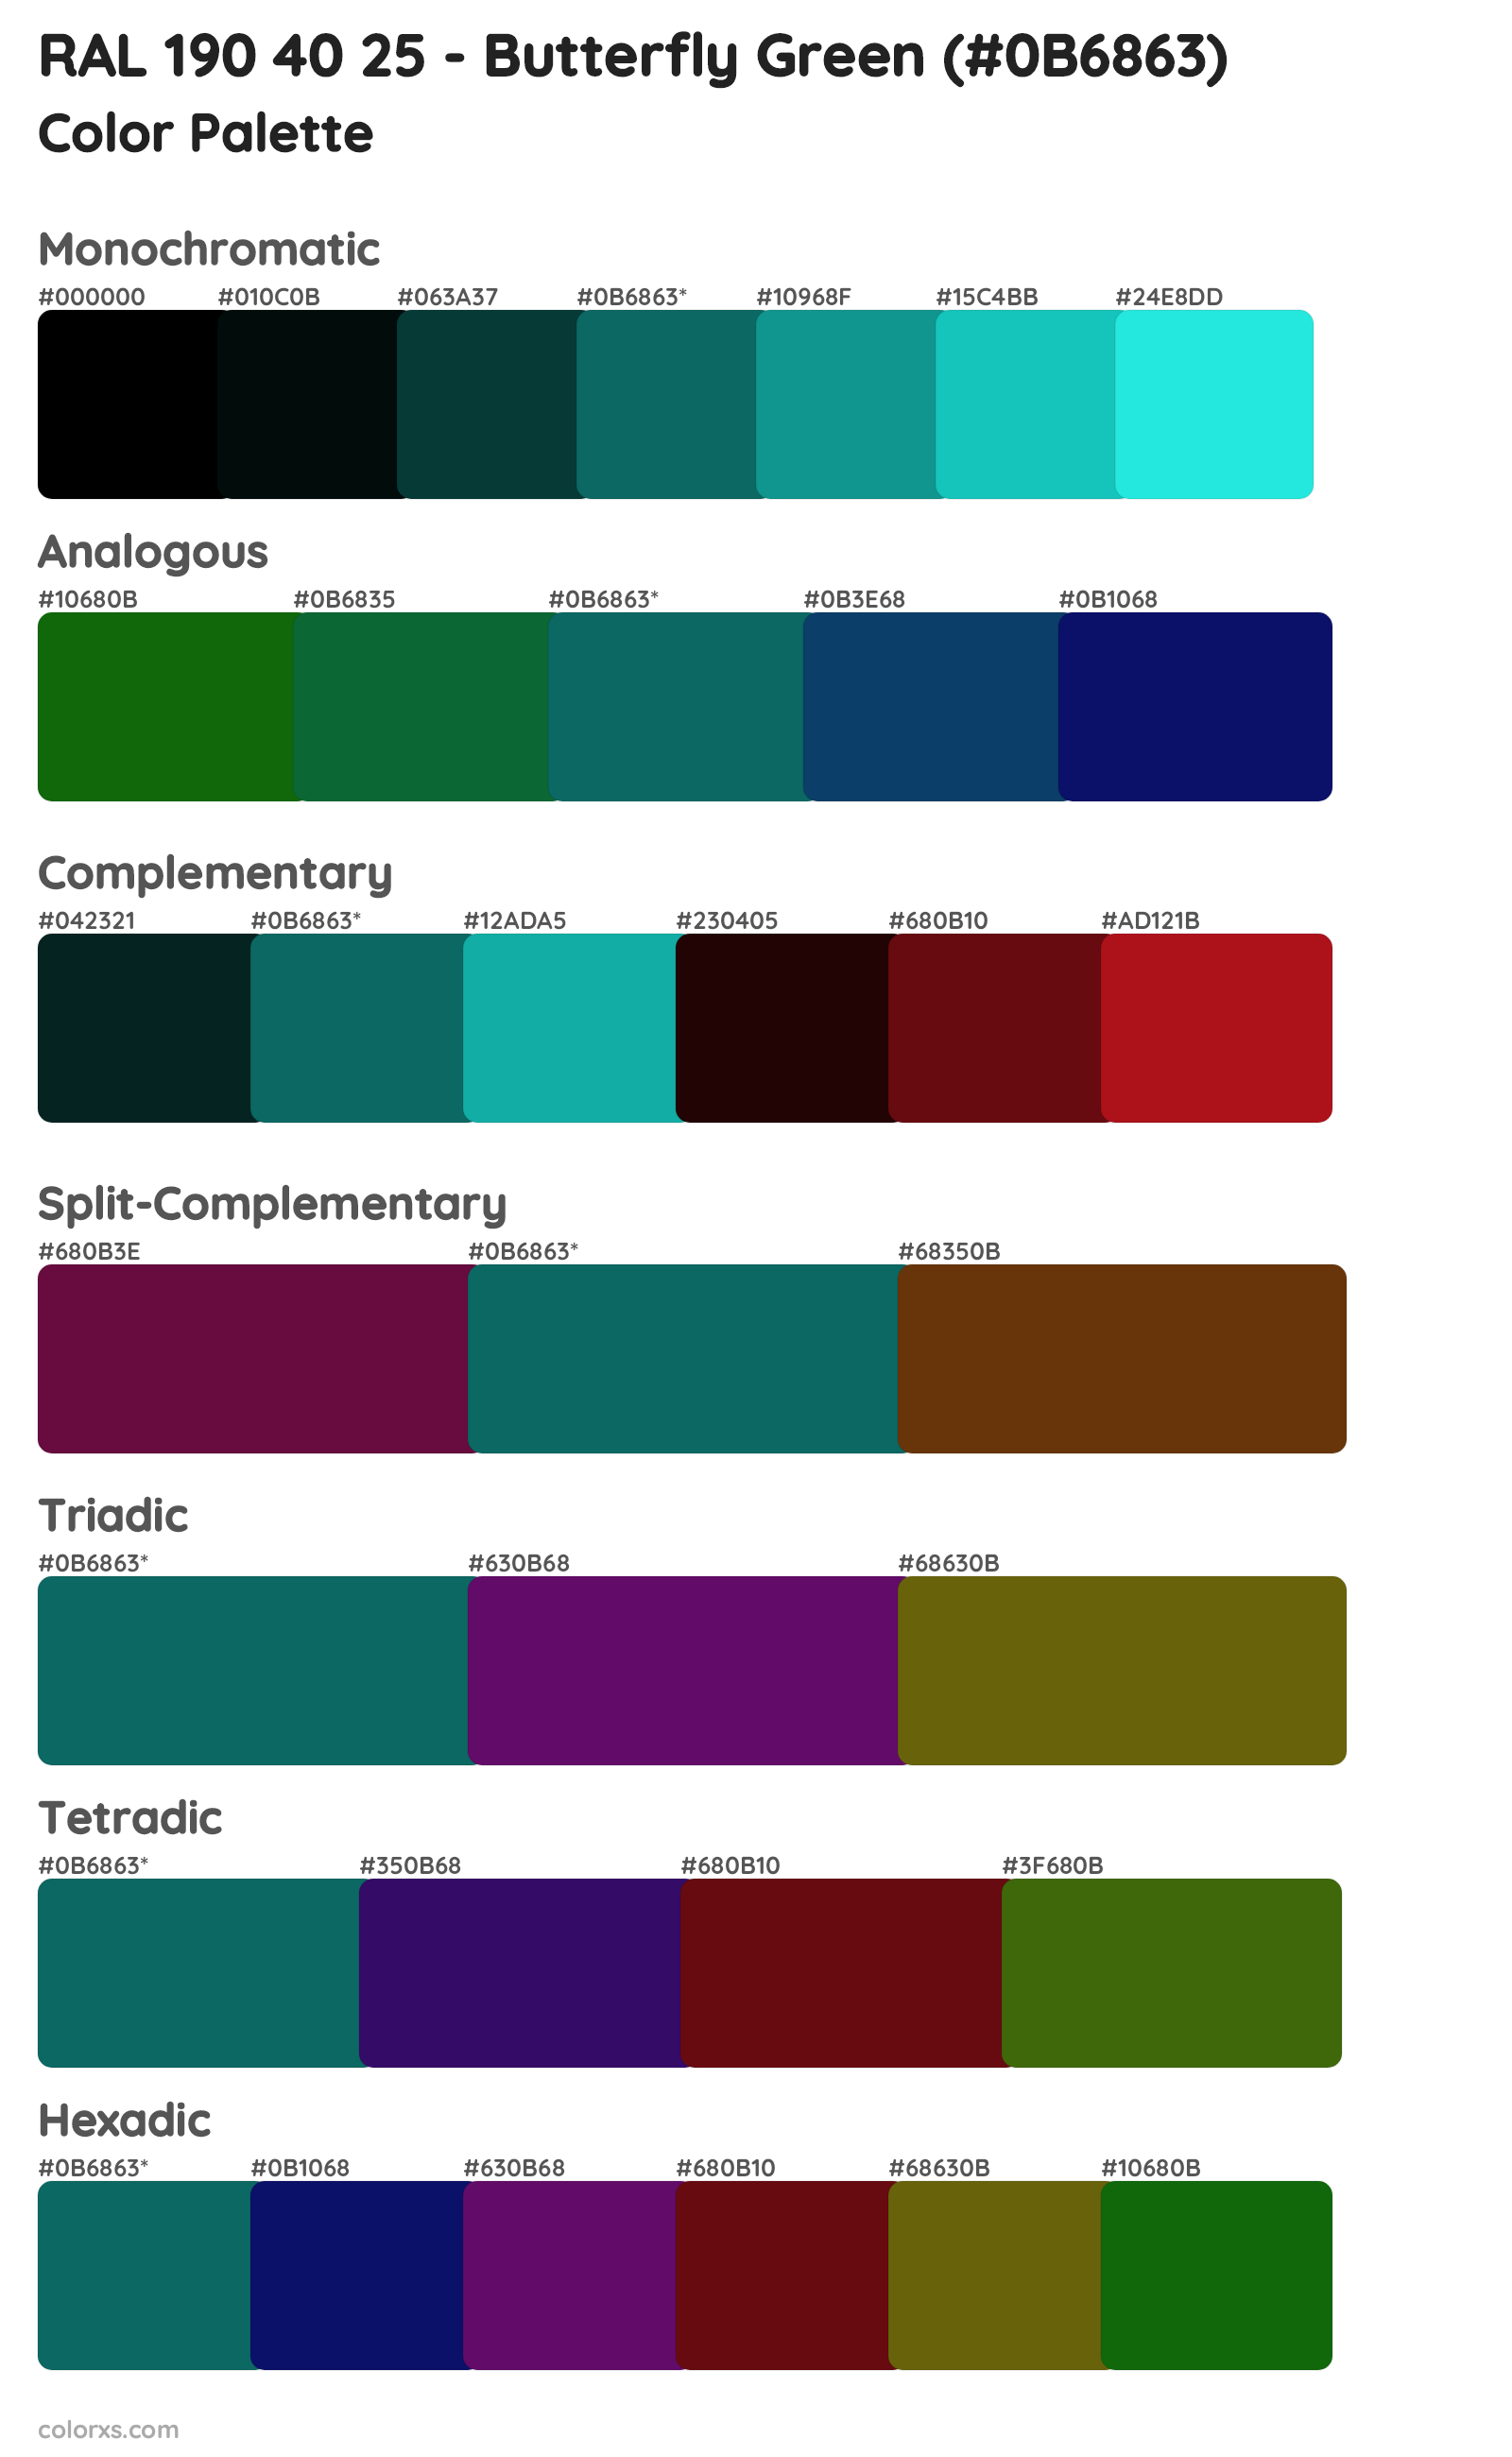 RAL 190 40 25 - Butterfly Green Color Scheme Palettes